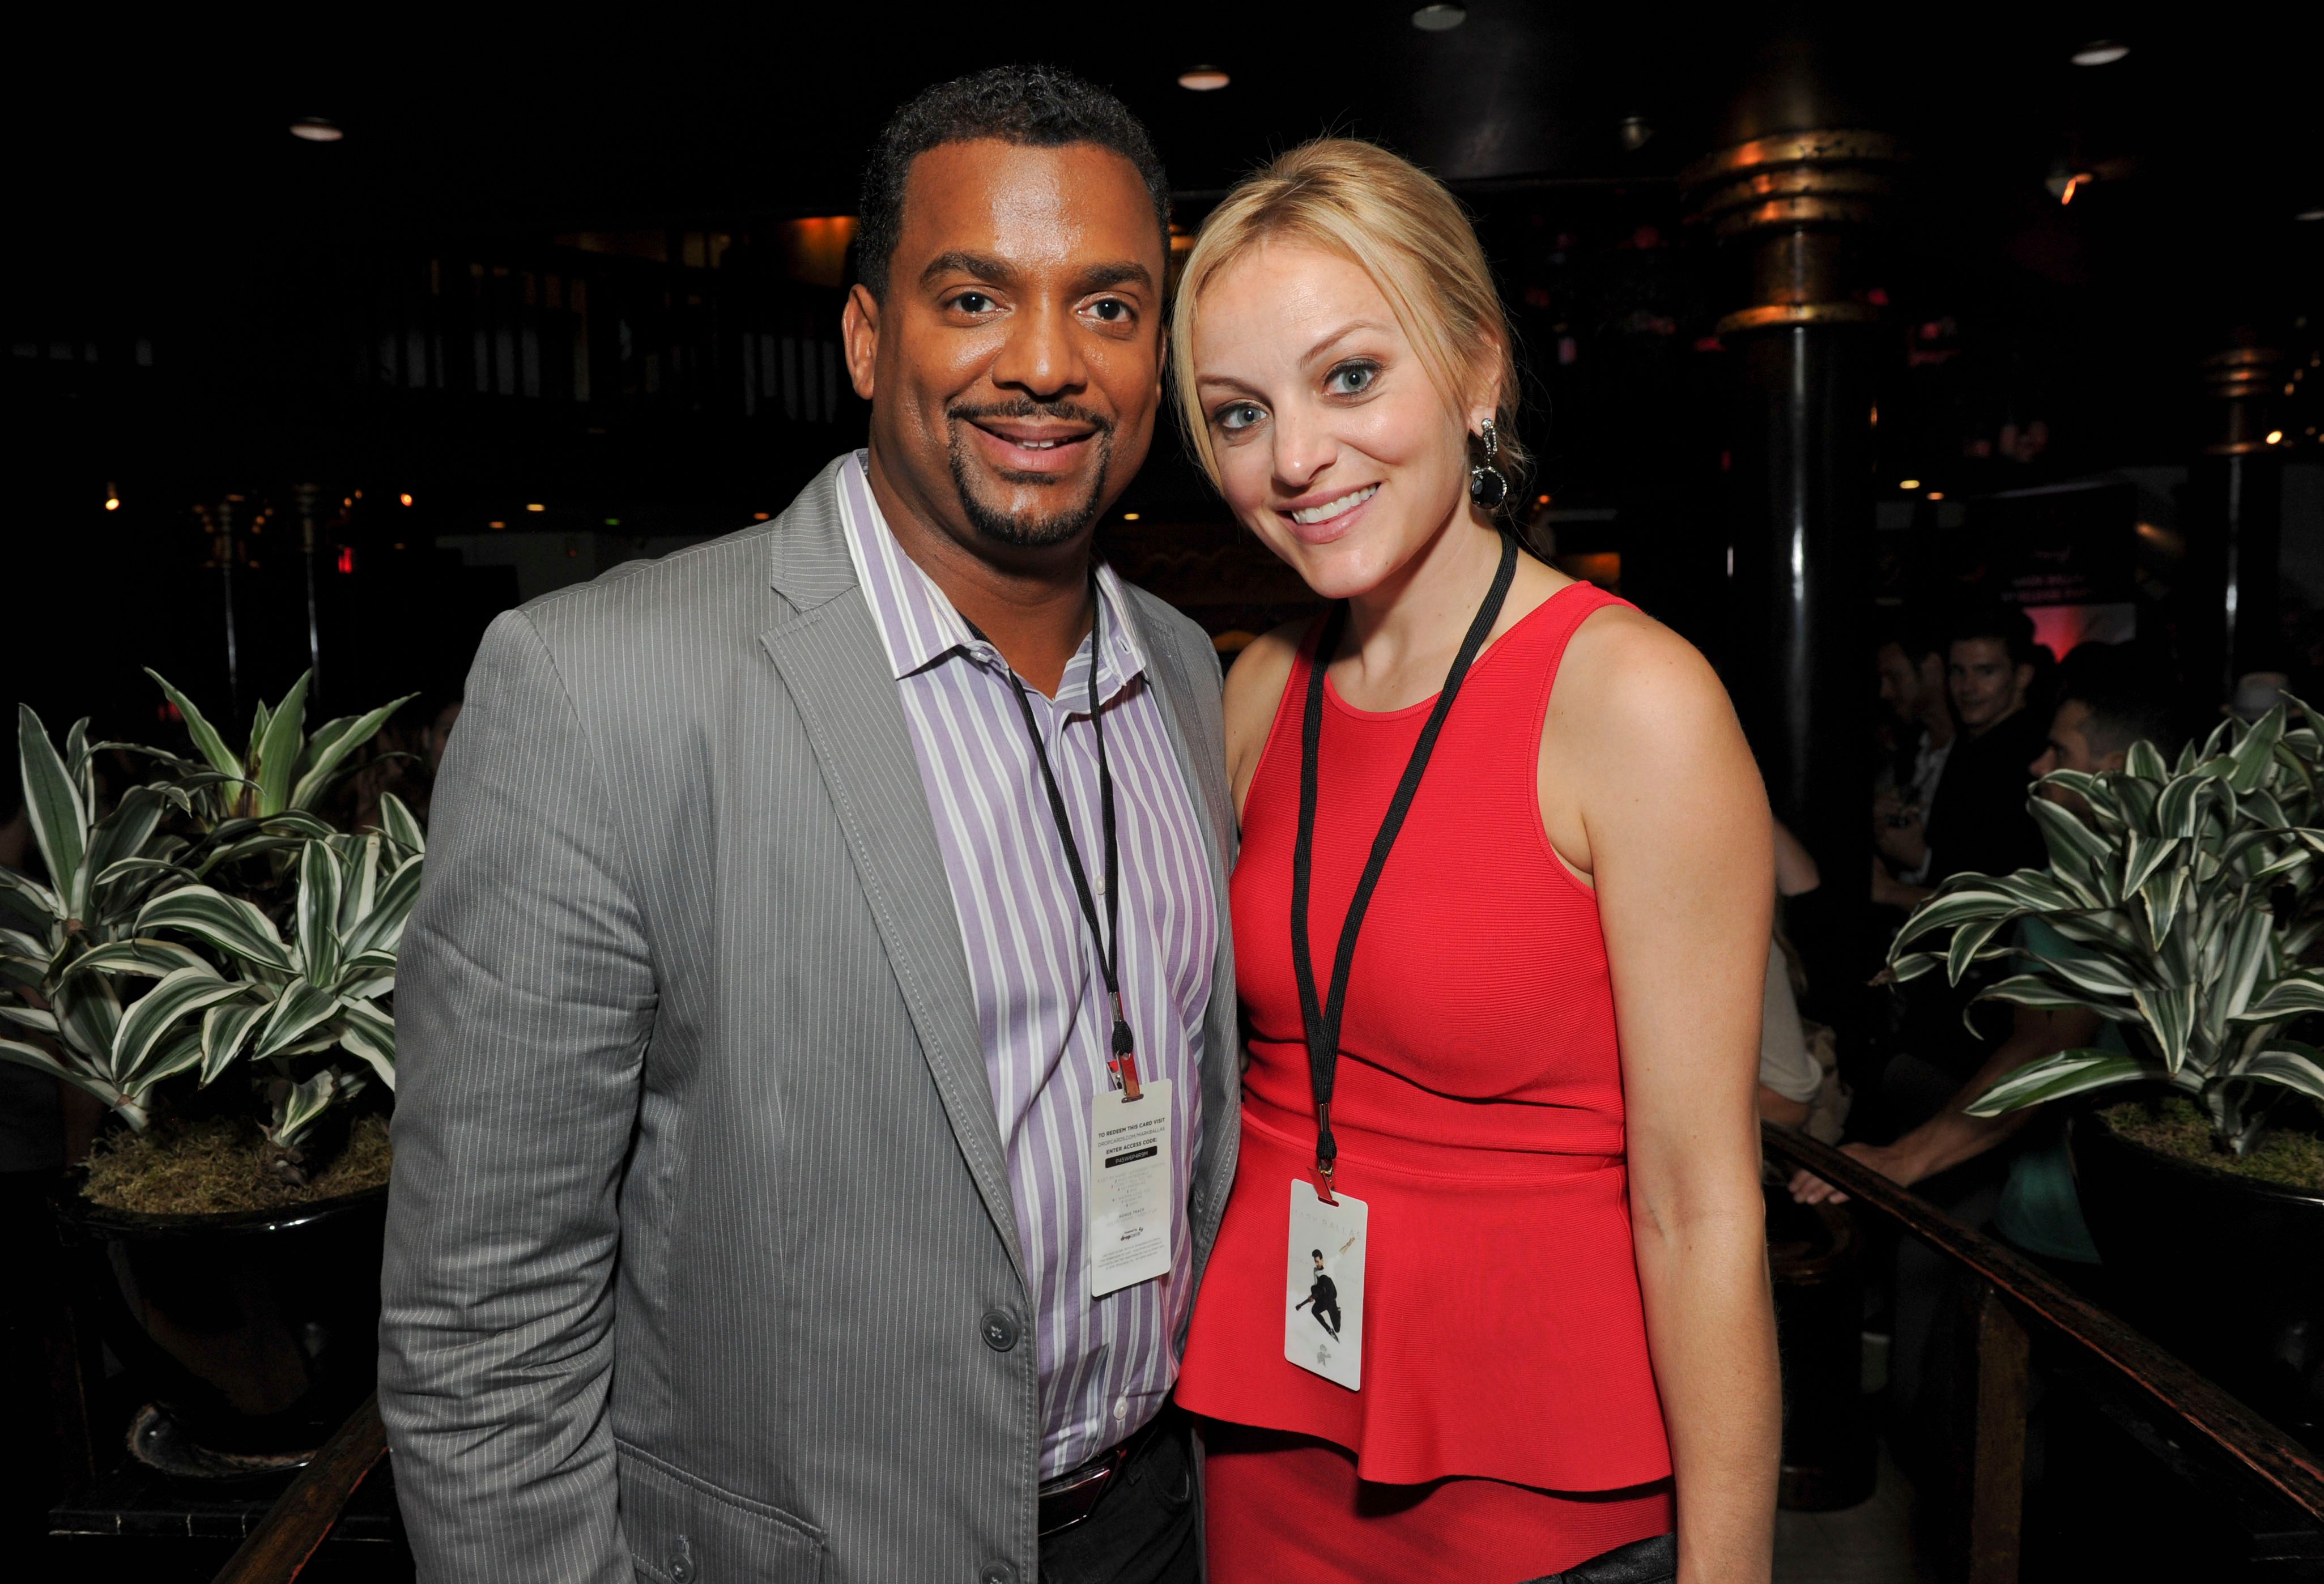 Alfonso Ribeiro and Angela Unkrich during the Mark Ballas Debuts EP "Kicking Clouds" at Crustacean on September 16, 2014 in Beverly Hills, California. | Source: Getty Images